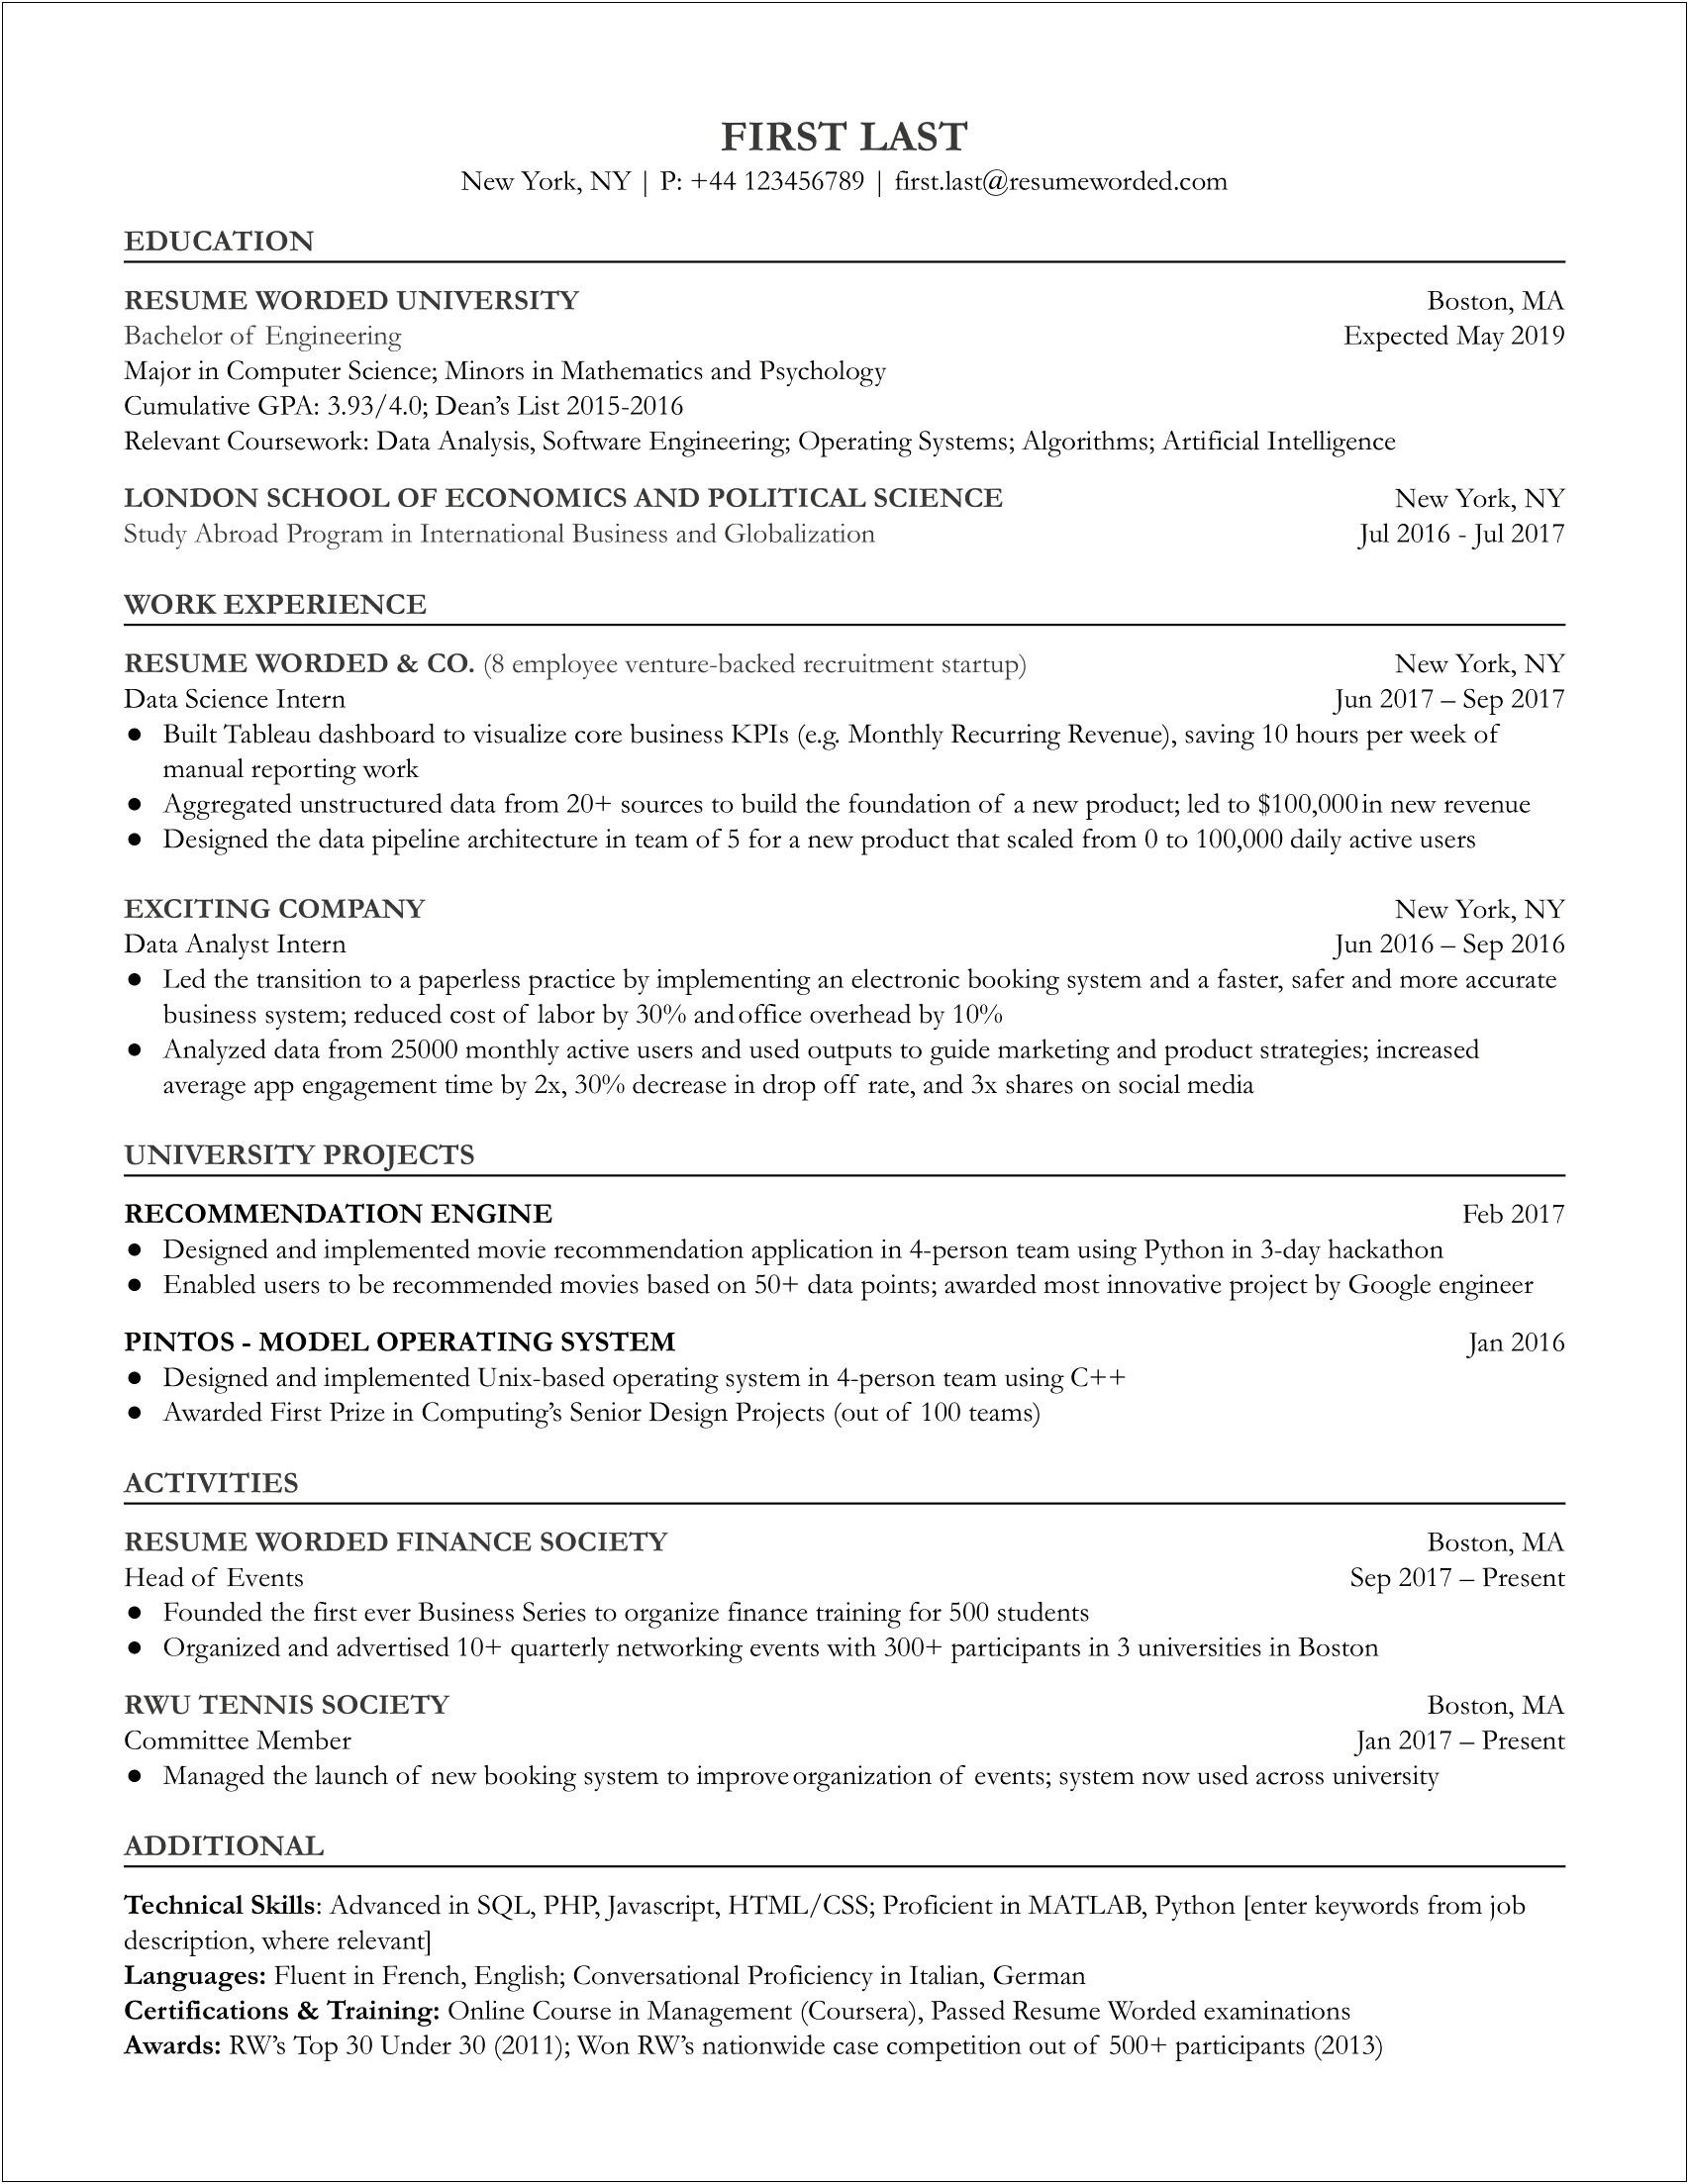 Data Analyst Resume With No Work Experience